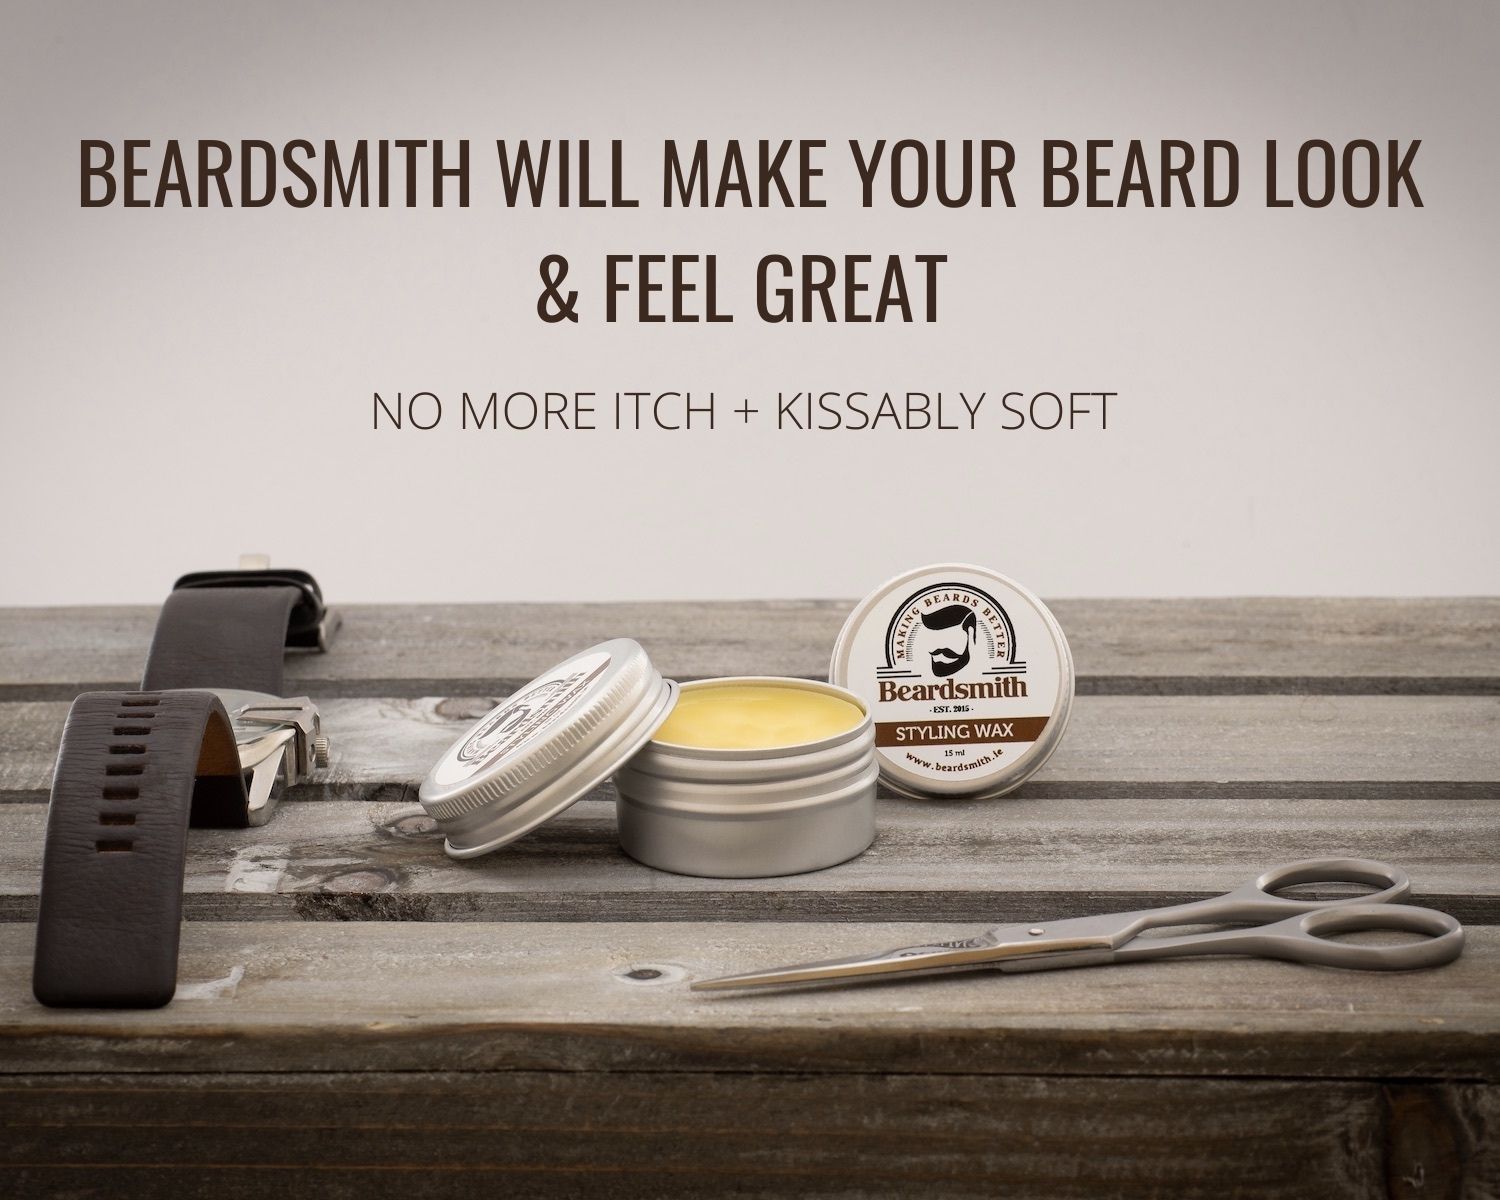 Tin of beard wax on a table with a watch and some scissors